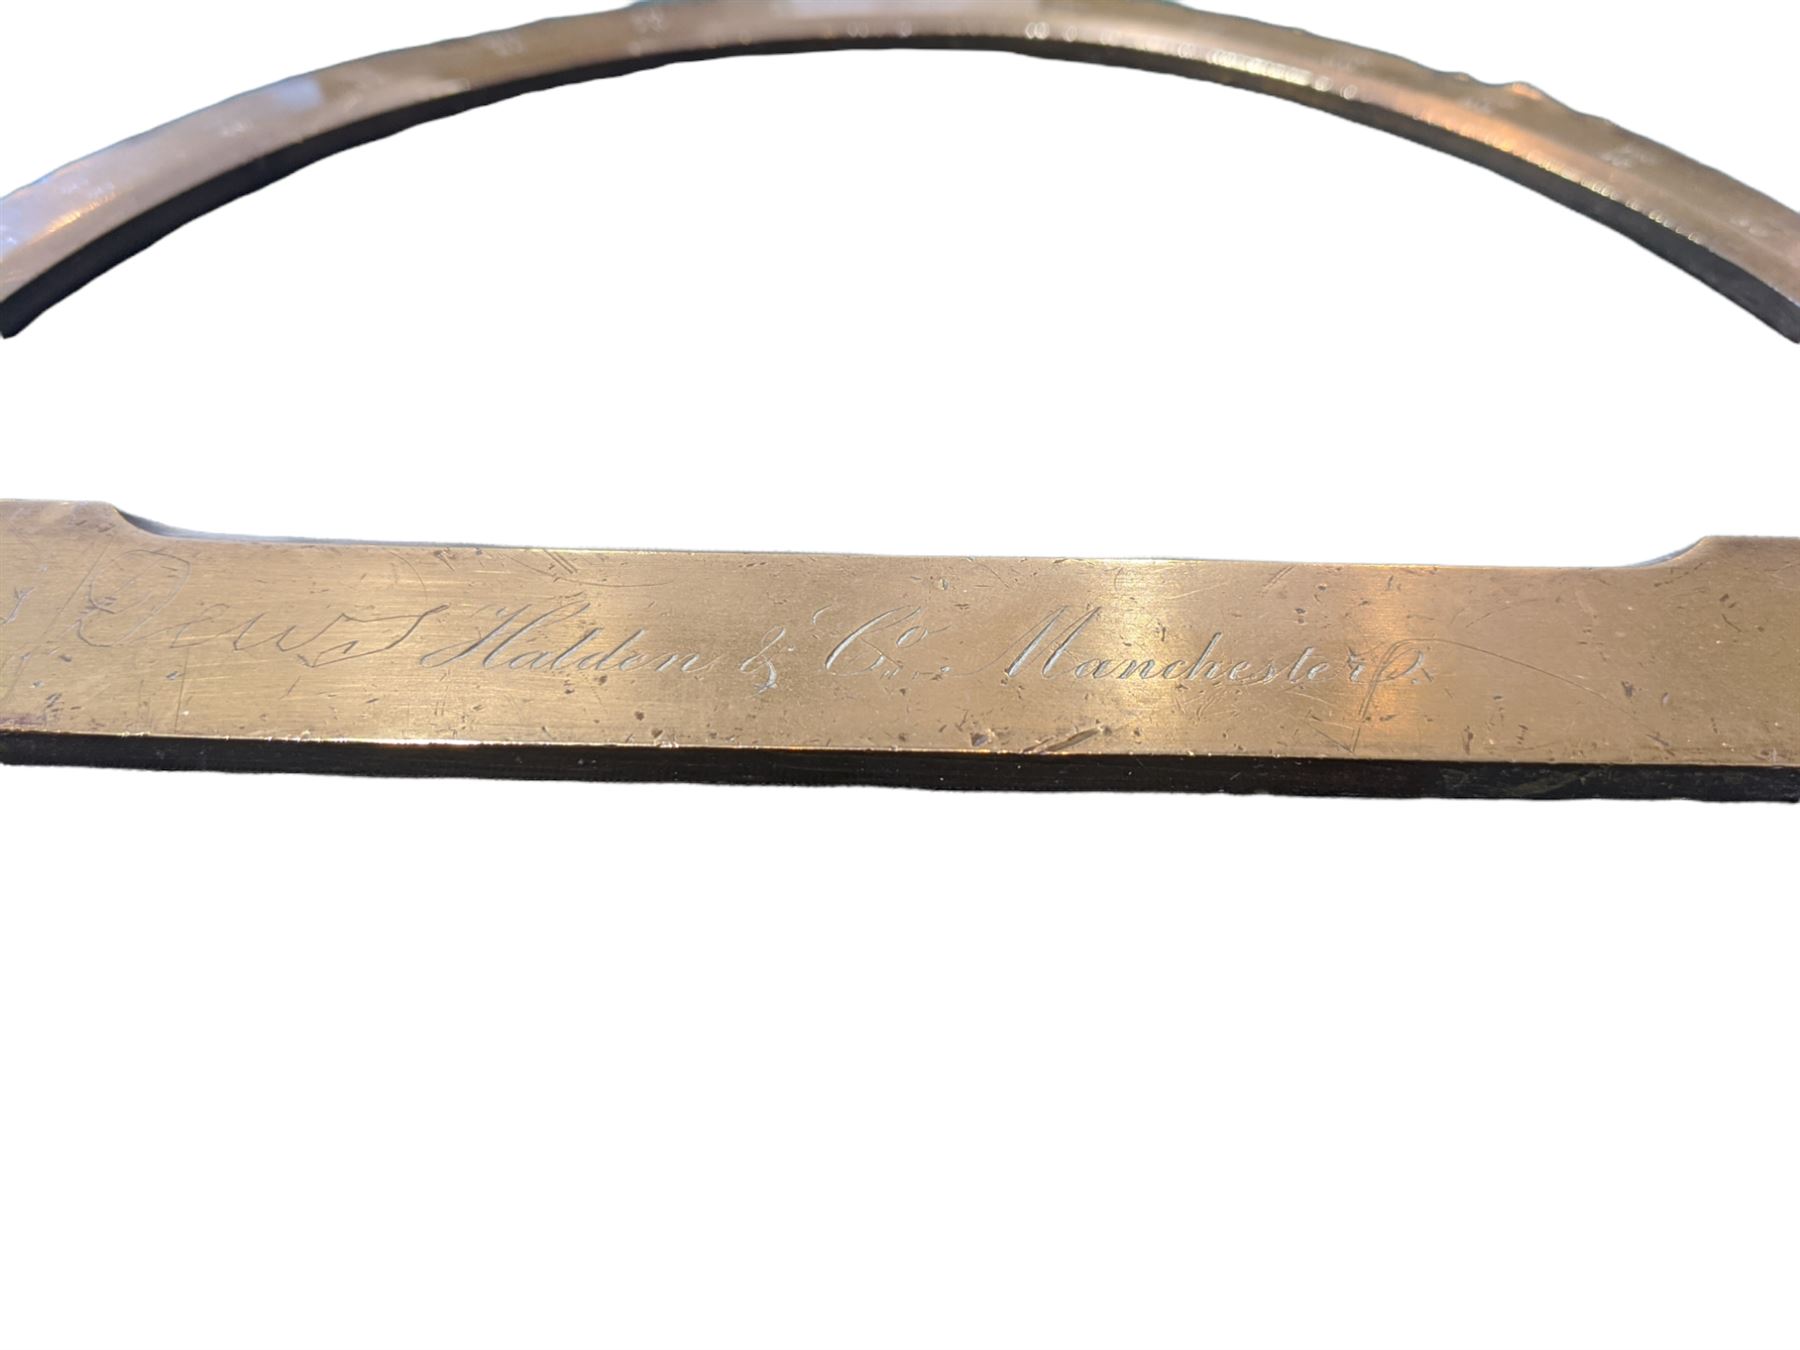 Brass protractor by Halden & Co Manchester - Image 2 of 2